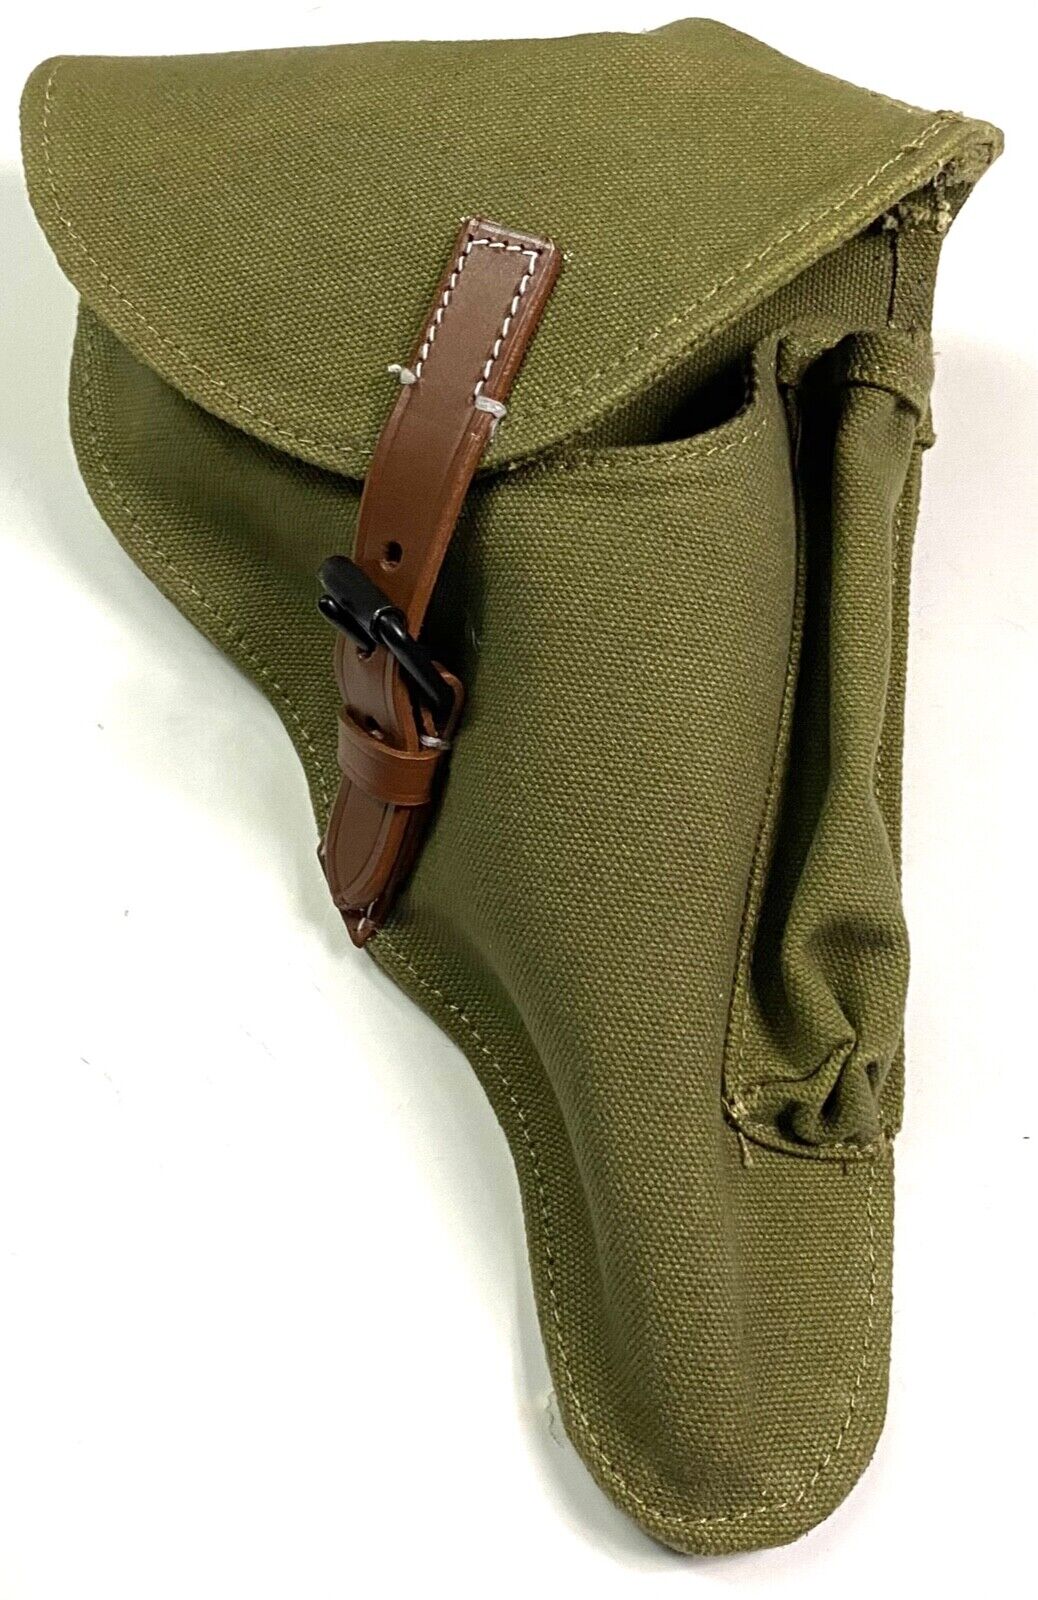 WWII GERMAN HEER WAFFEN ARMY P08 LUGER DAK TROPICAL CANVAS & WEB PISTOL HOLSTER